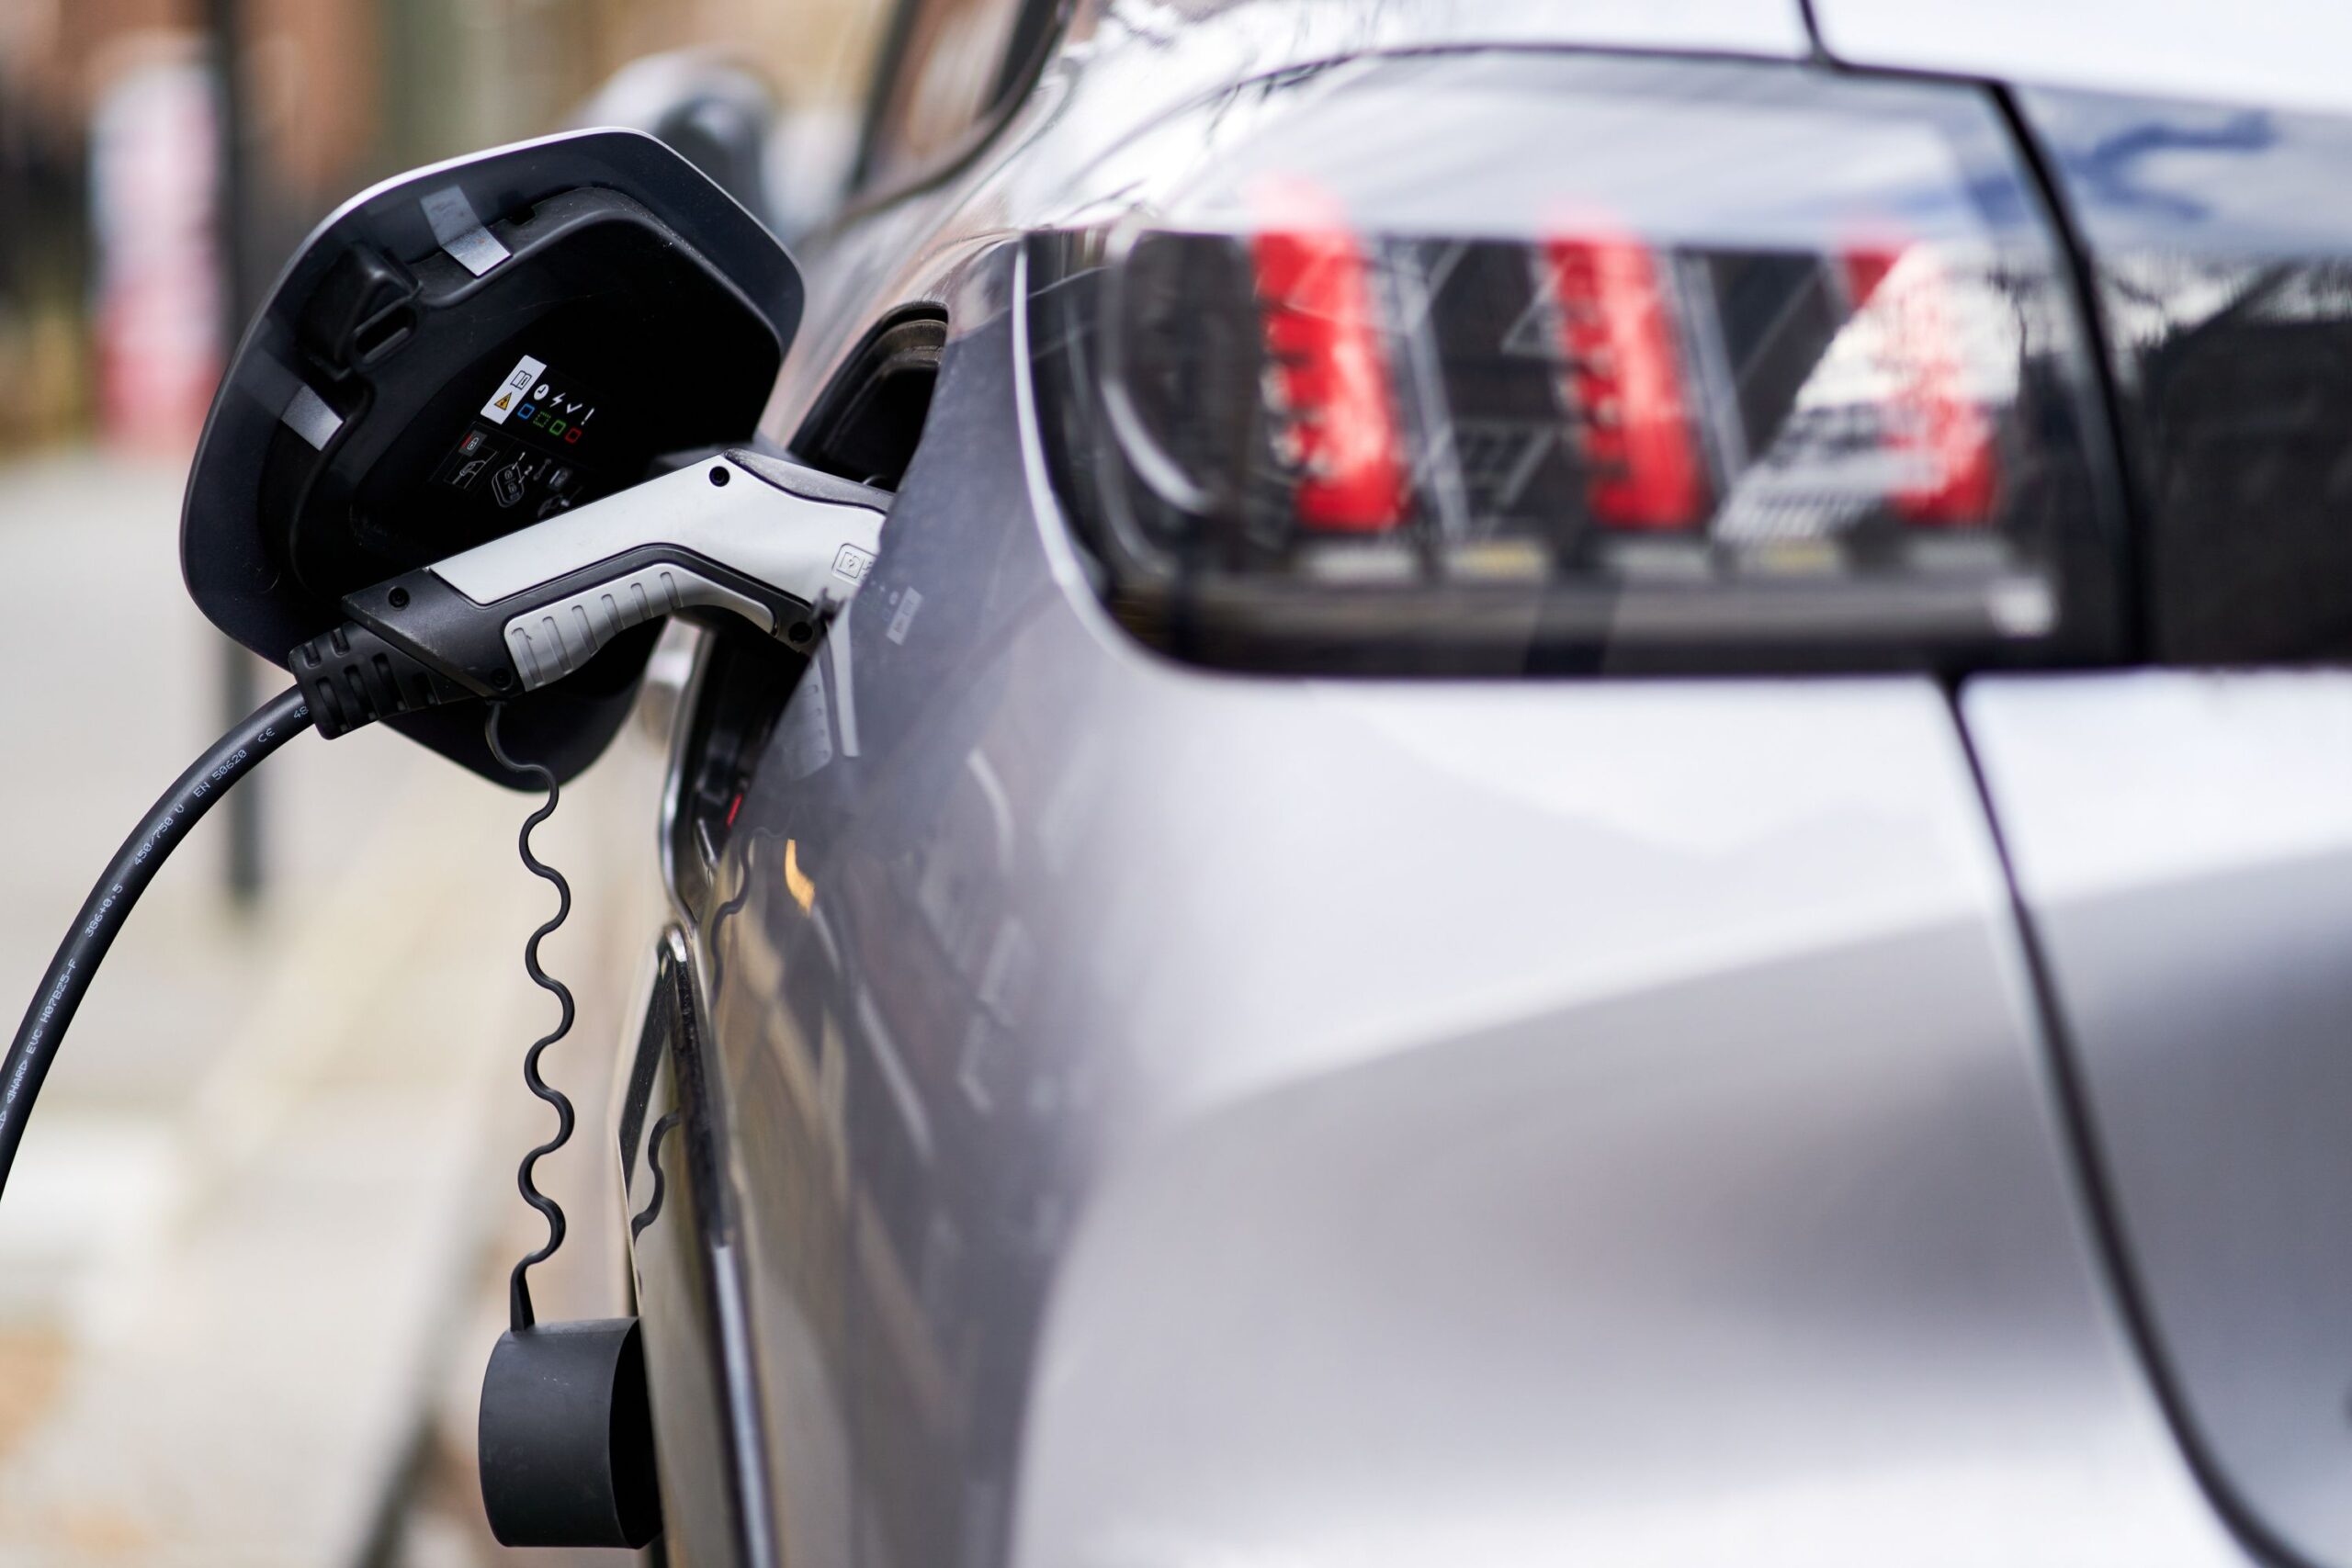 Fuel for electric vehicles is less than half the yearly cost of a diesel equivalent, new AA data reveals